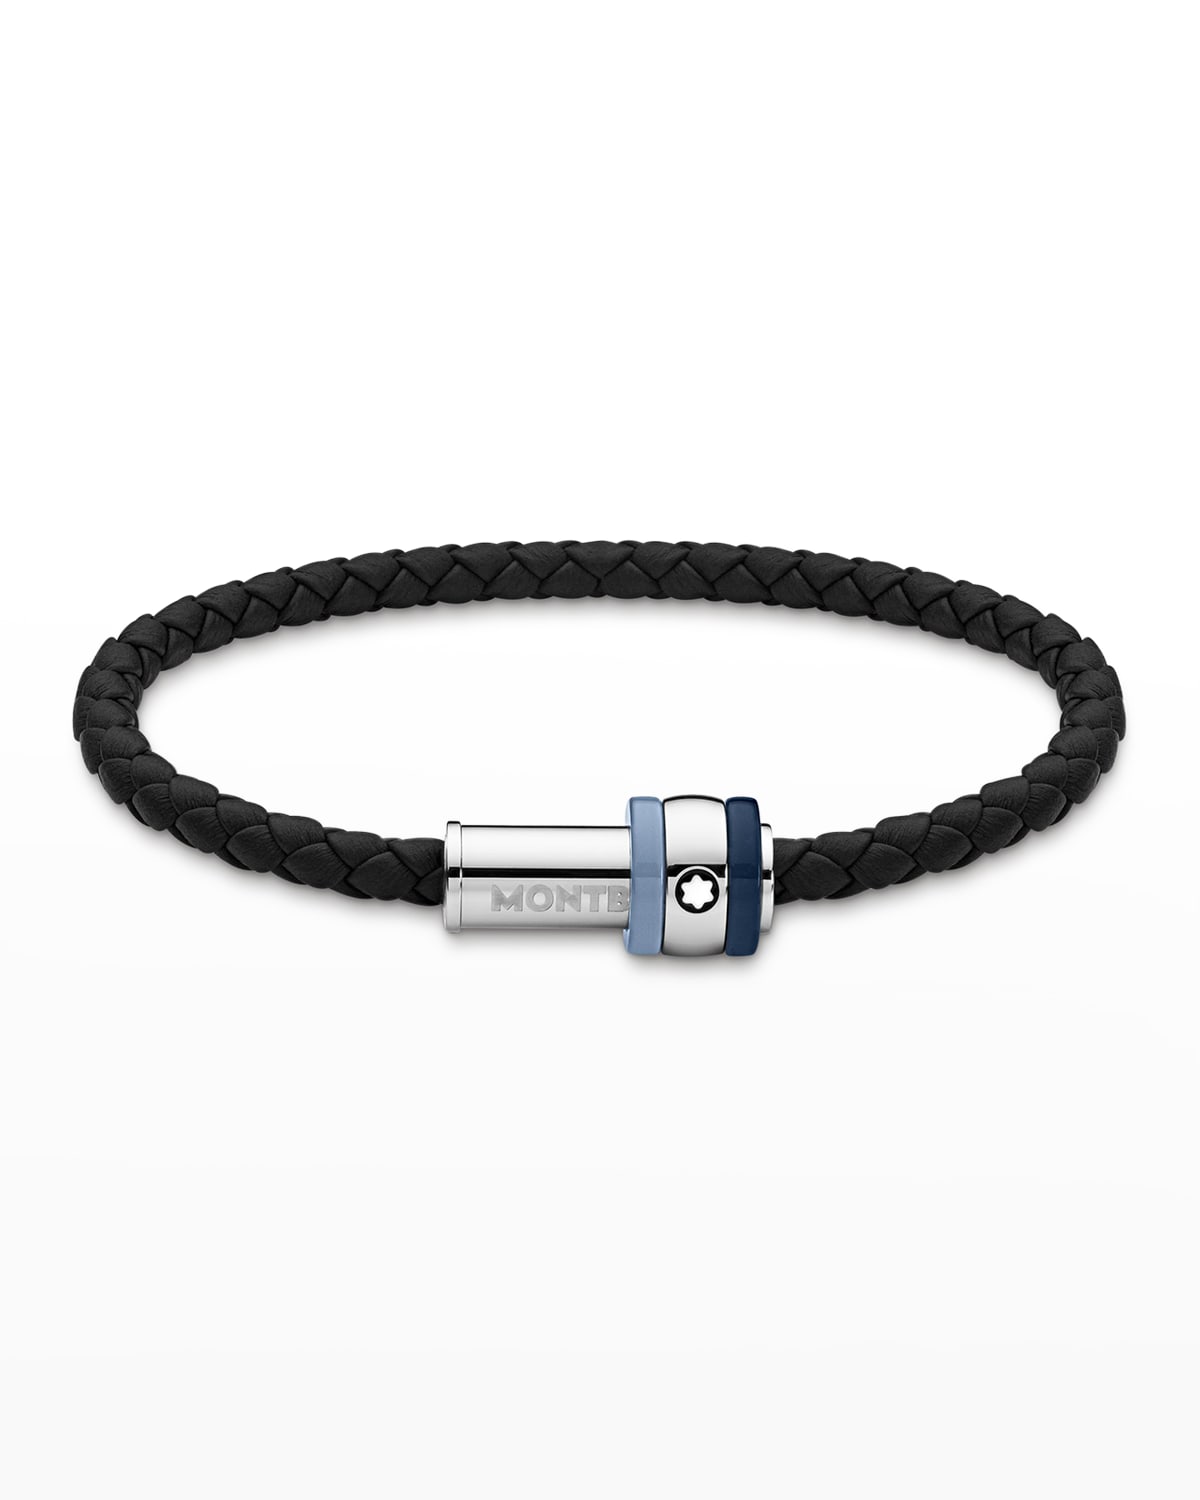 MONTBLANC WRAP ME BRACELET IN BLUE LEATHER WITH CARABINER CLOSURE IN  STAINLESS STEEL, Blue Men's Bracelet